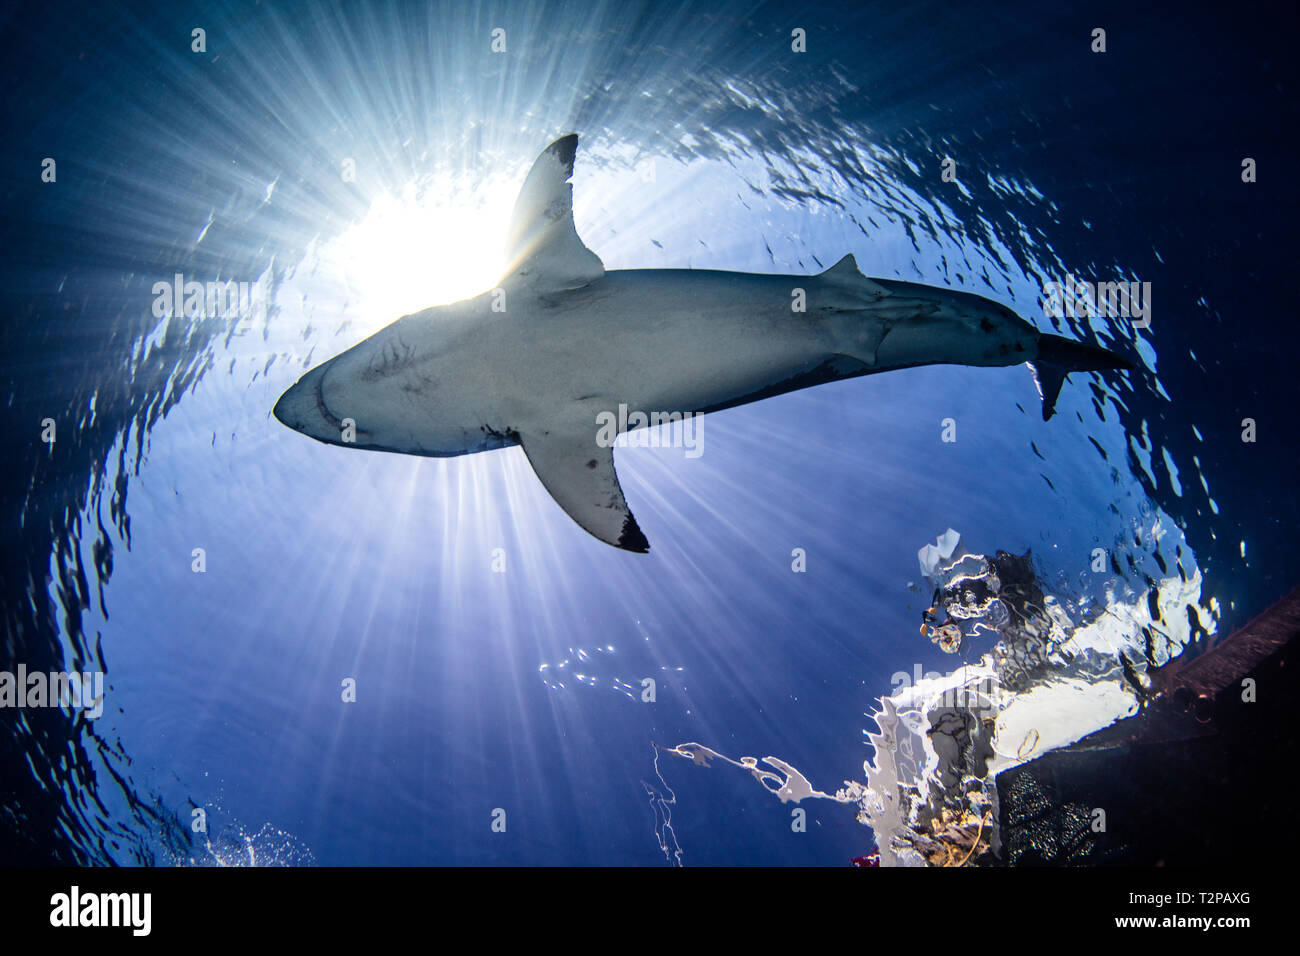 Underwater view of great white shark, low angle view, Guadalupe, Mexico Stock Photo